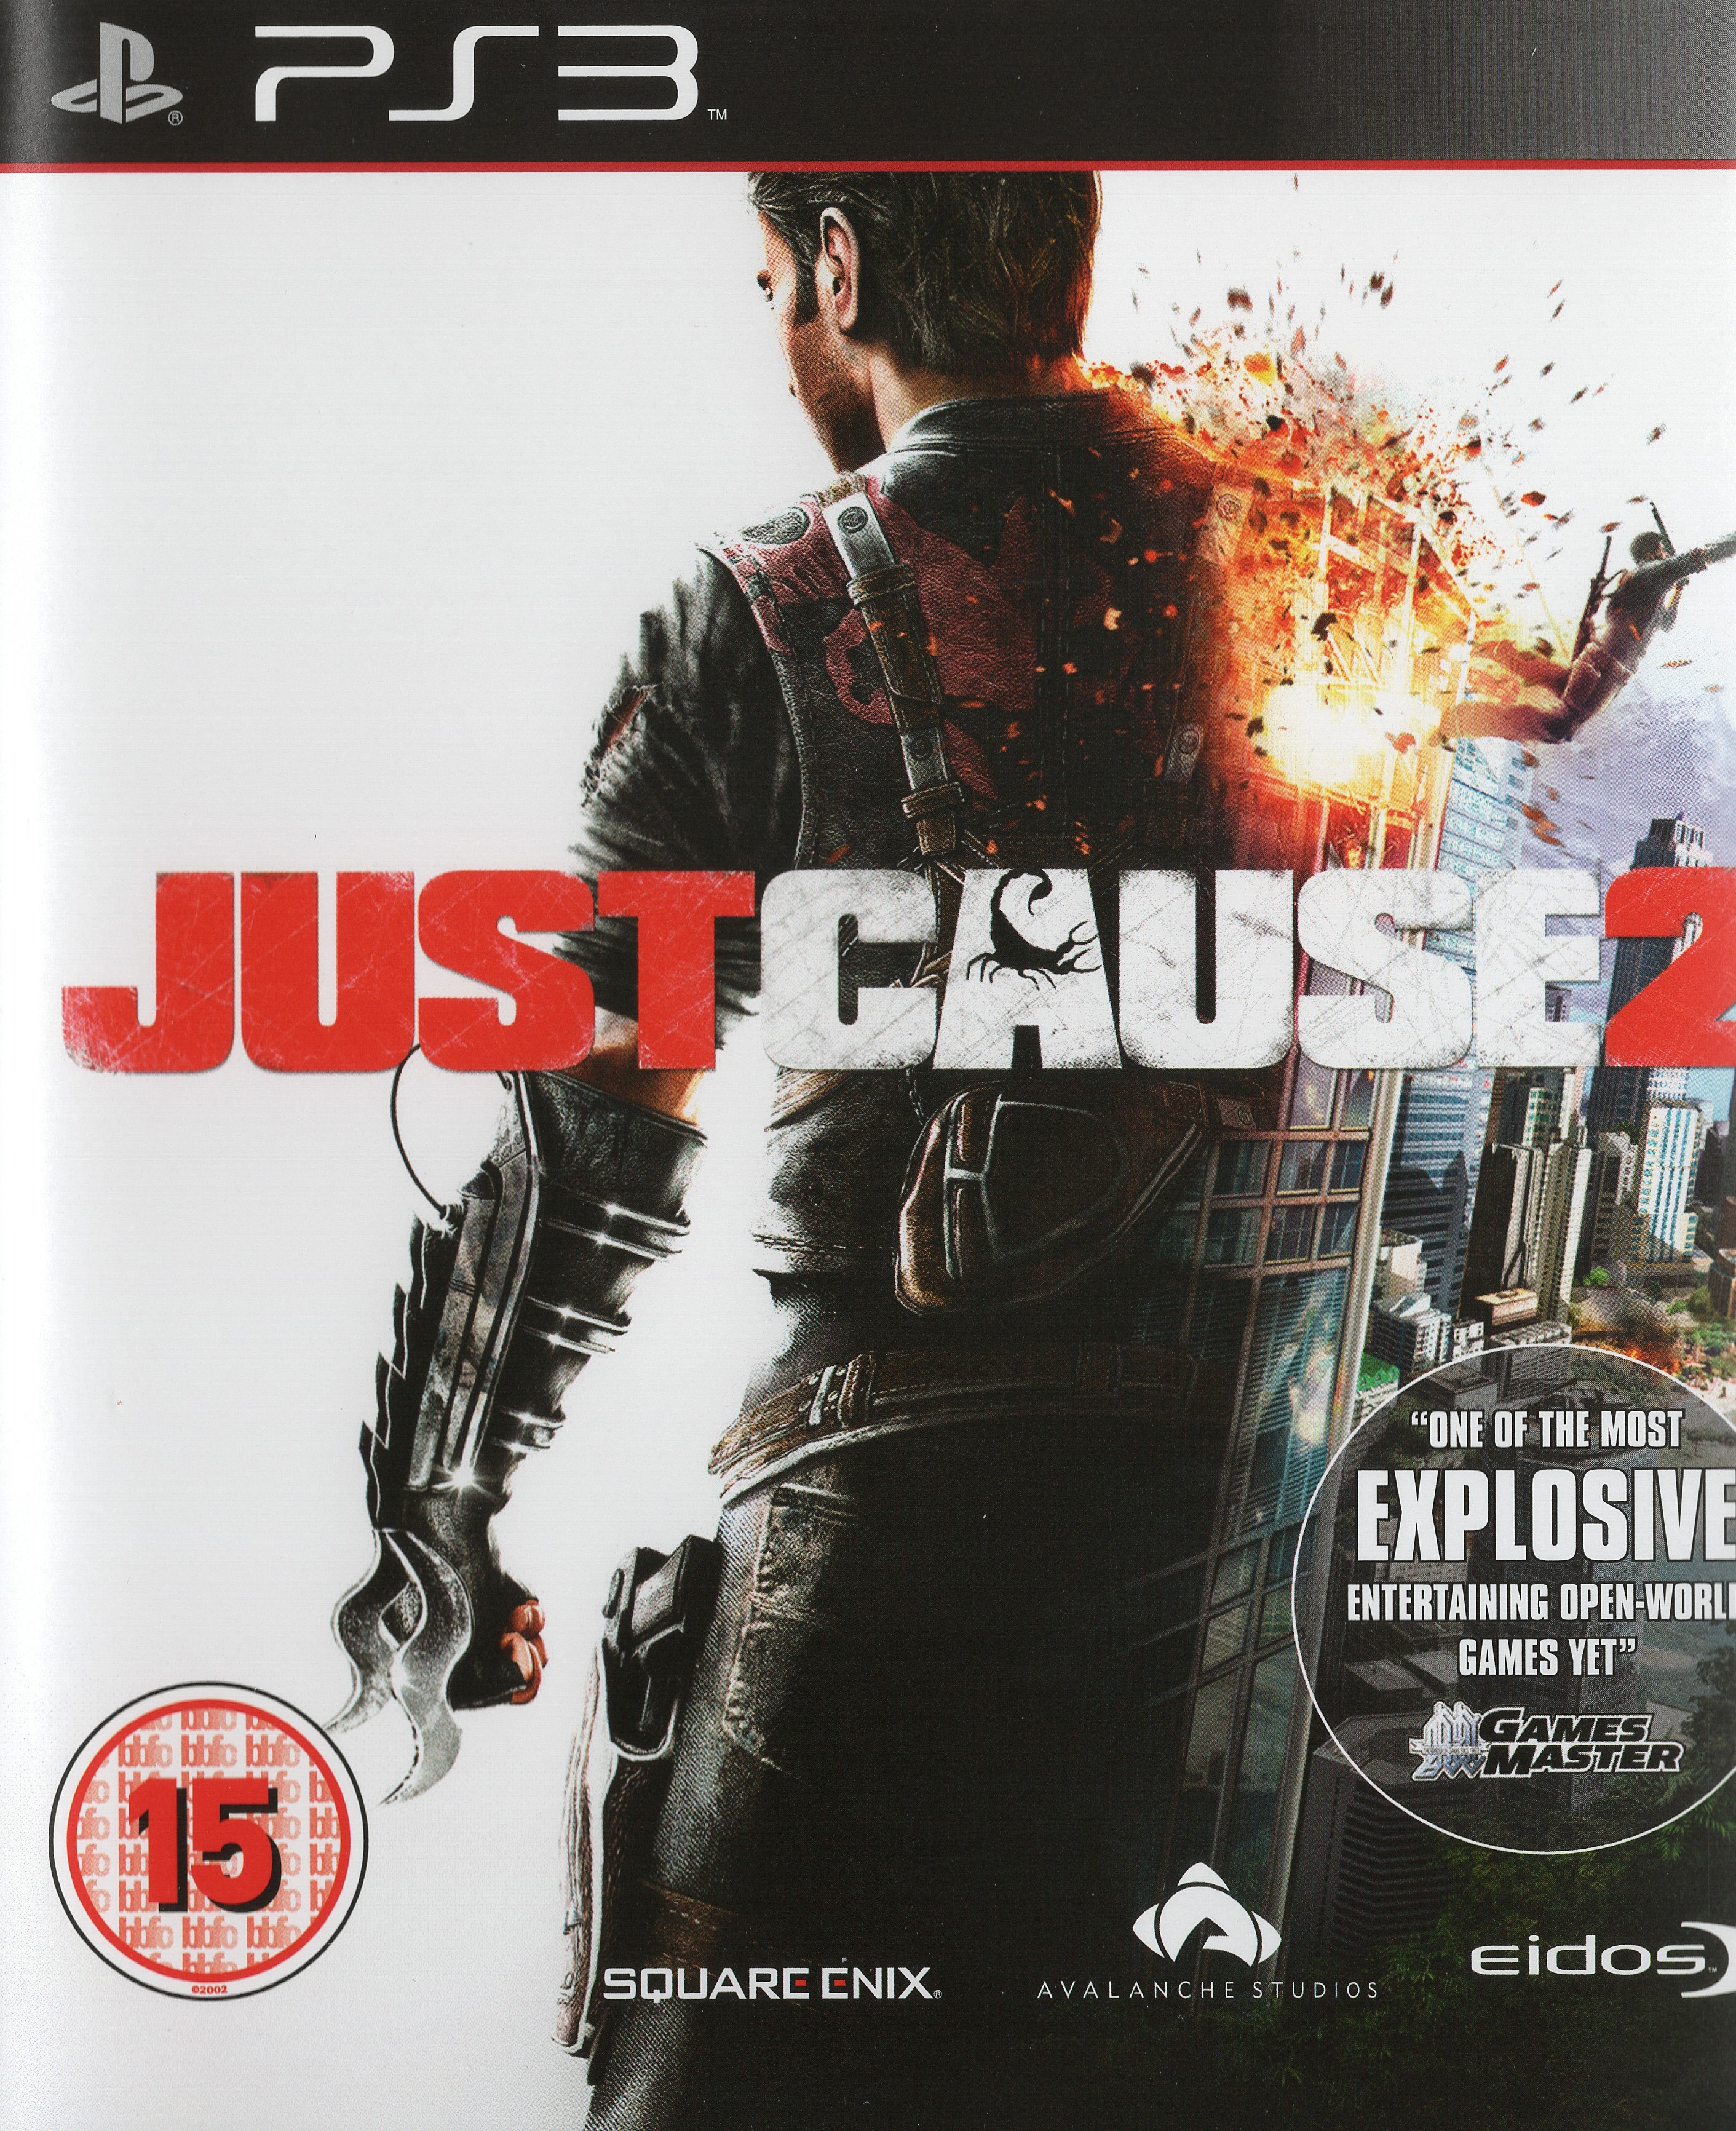 Just Cause 2 Limited Edition